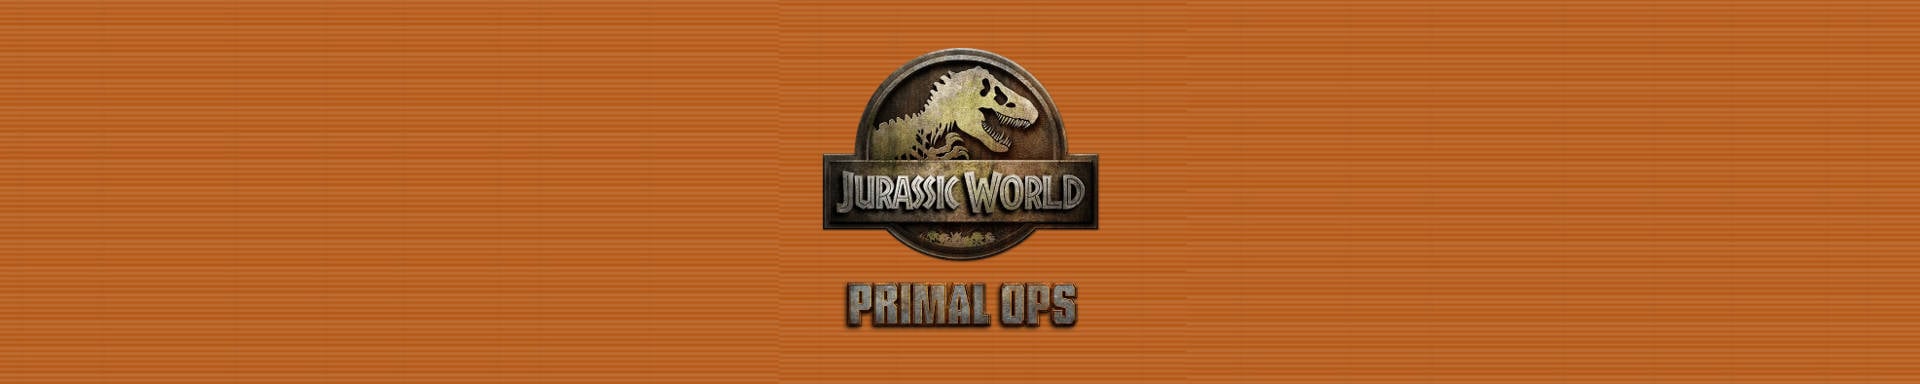 Jurassic World Primal Ops Mobile Game Android dan iOS slice